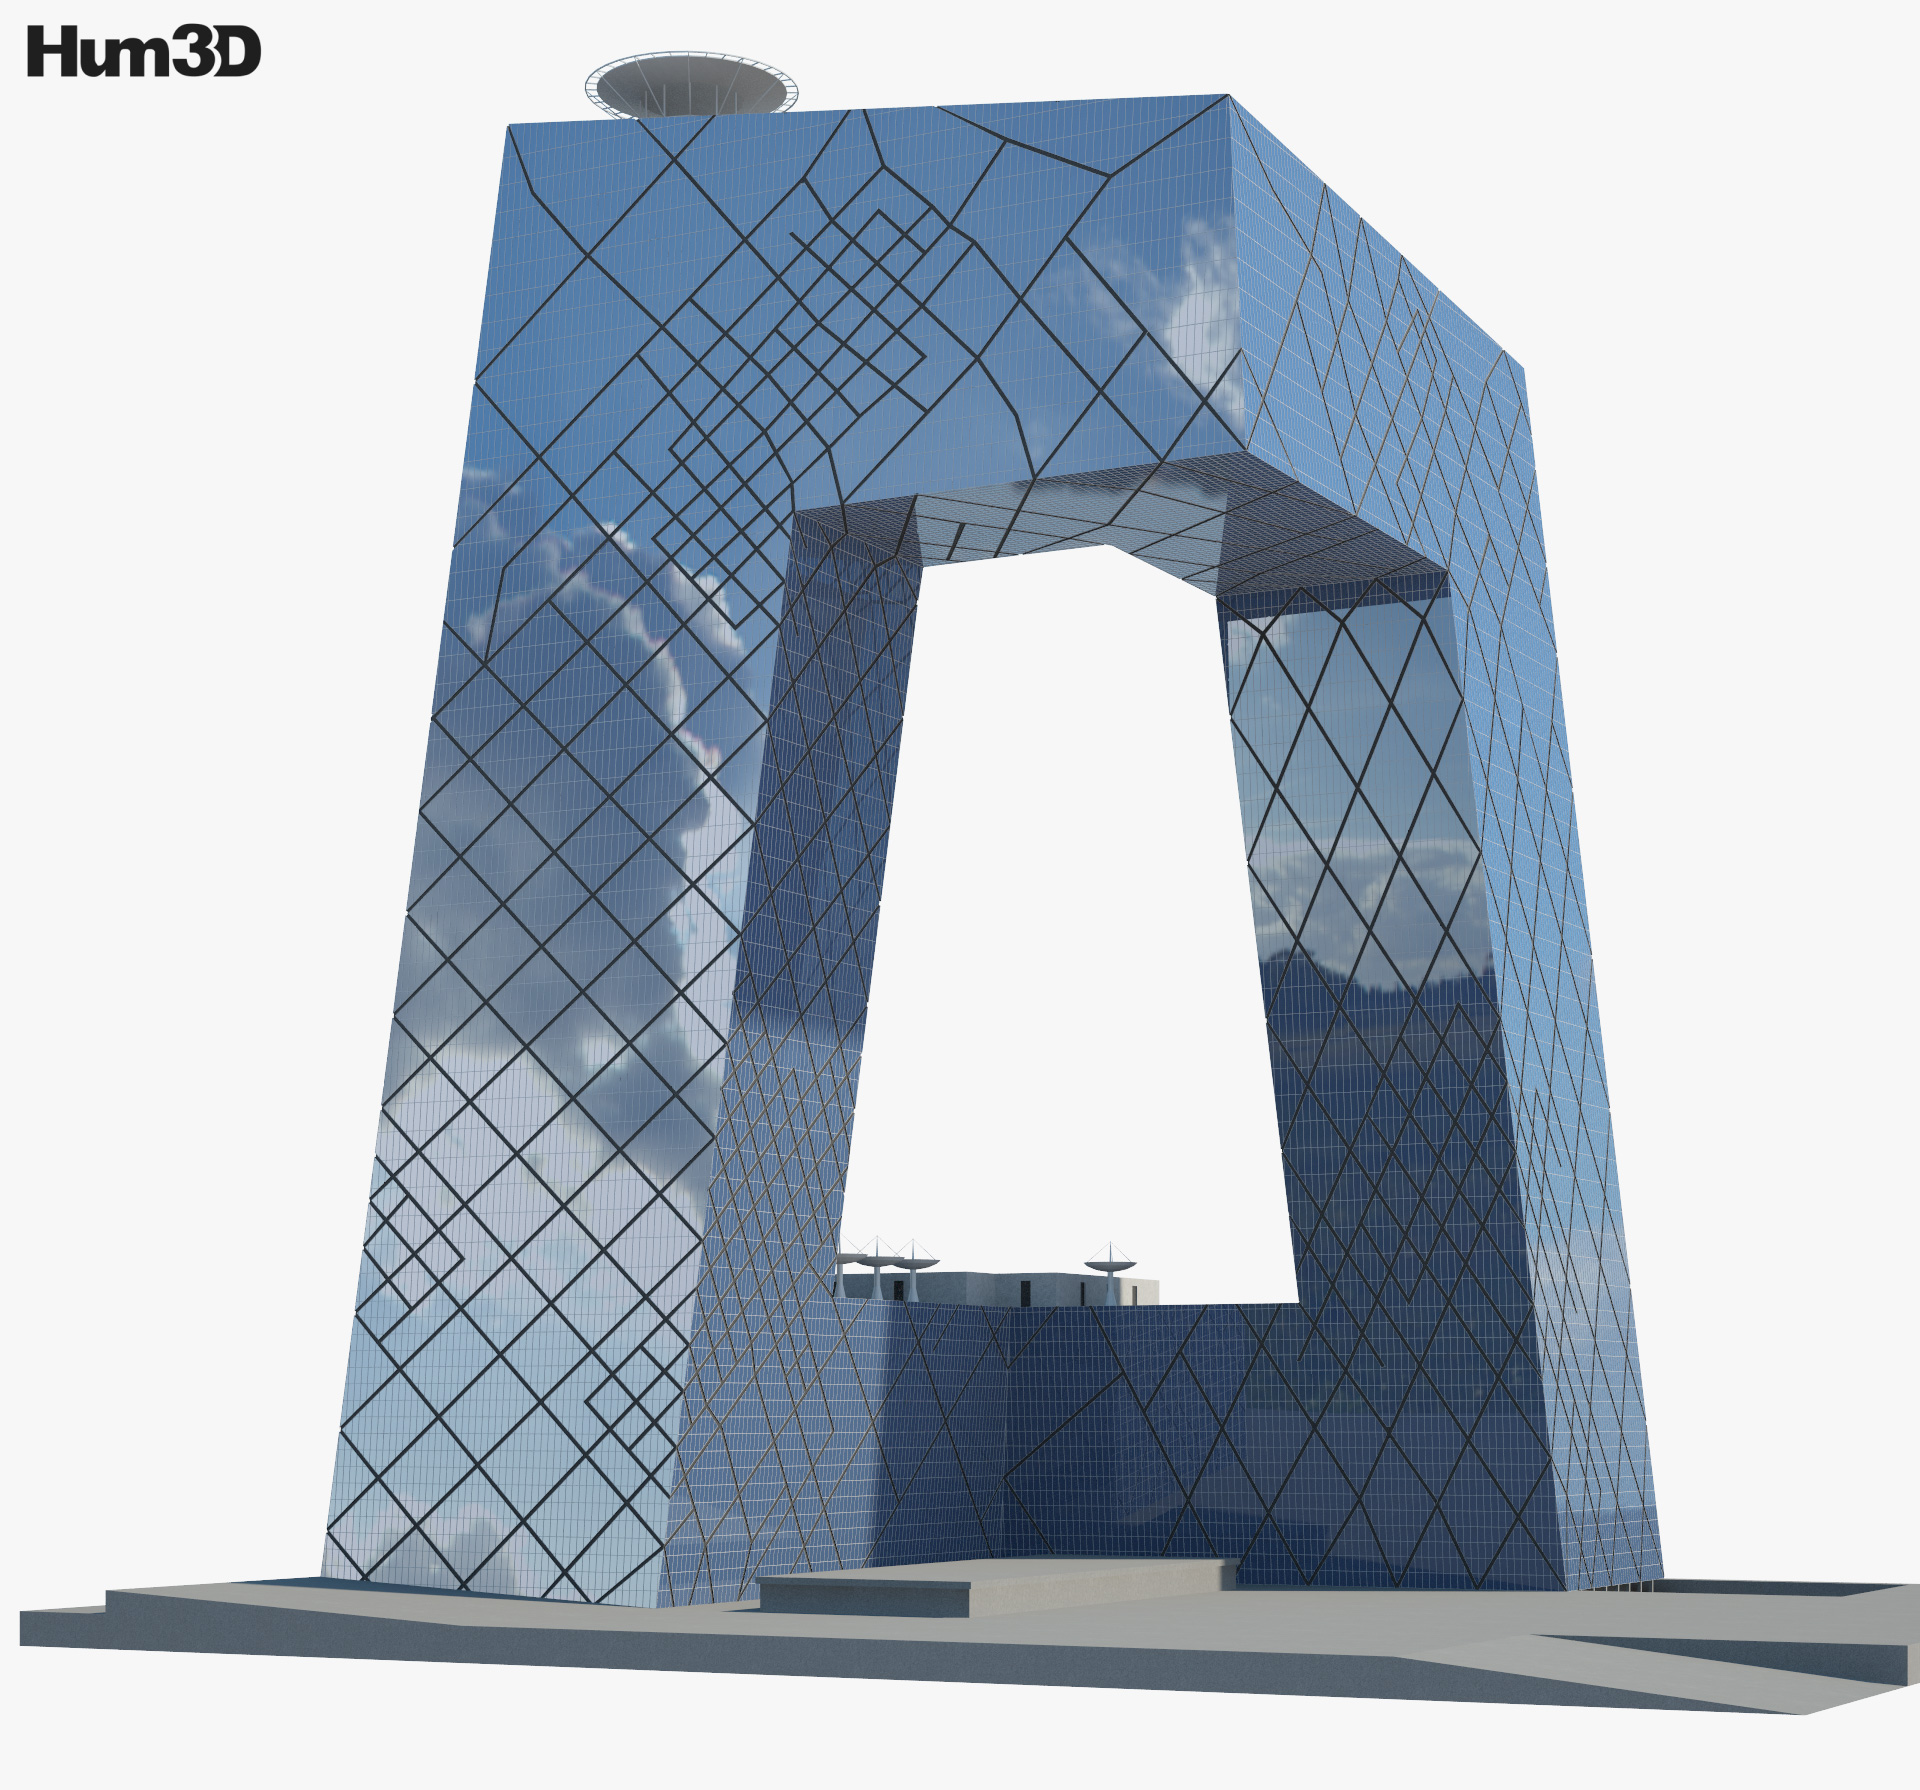 China Central Television Headquarters 3D-Modell